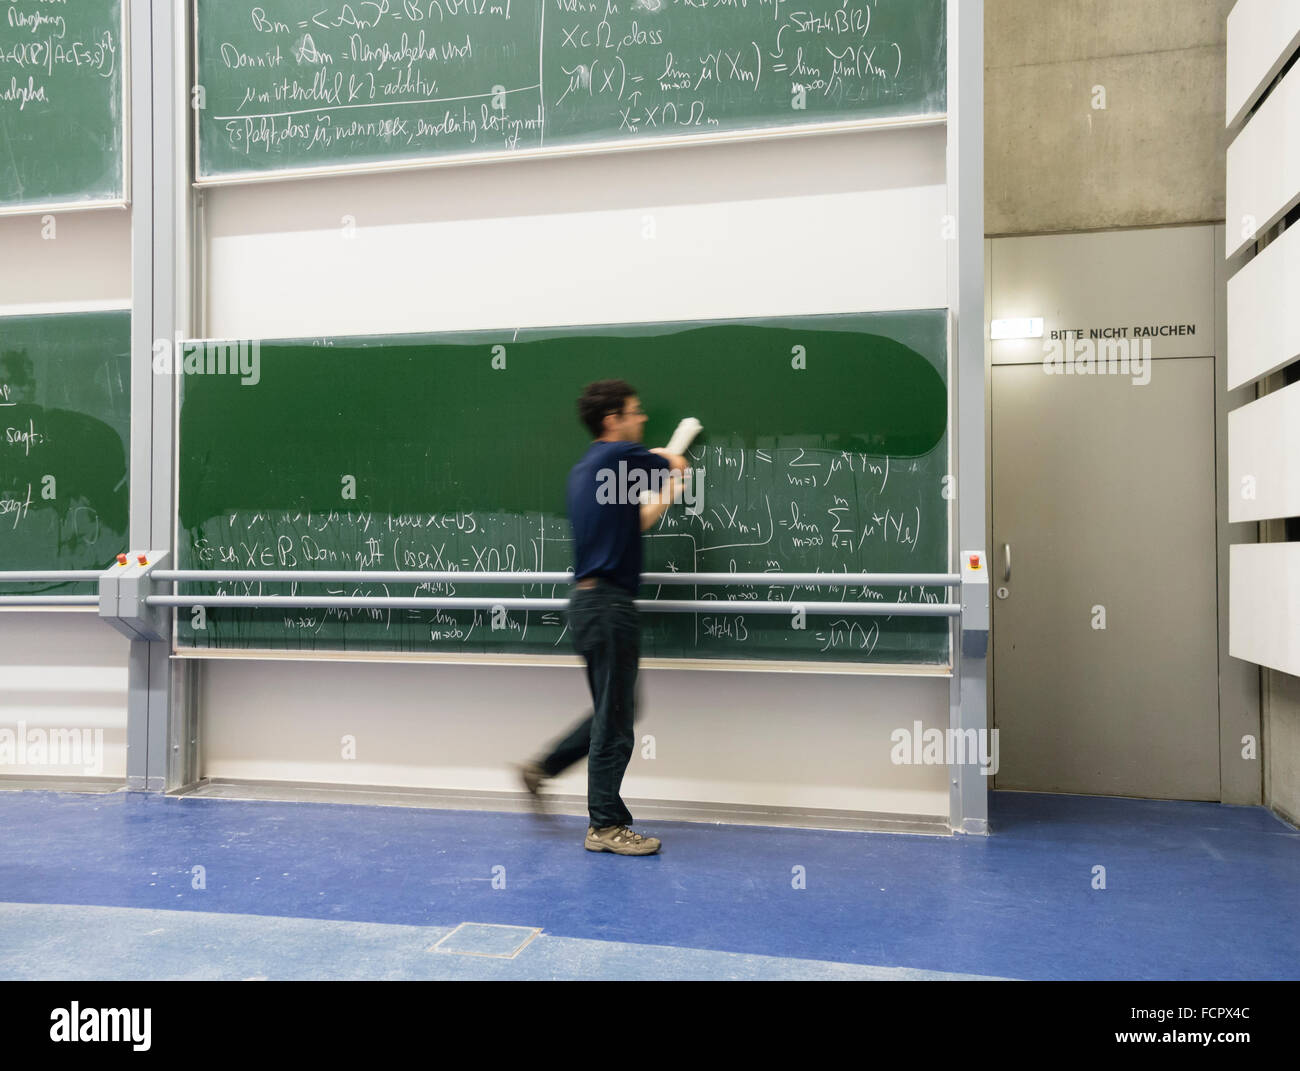 Professor wiping away scientific formulas from large double blackboard at university. Stock Photo